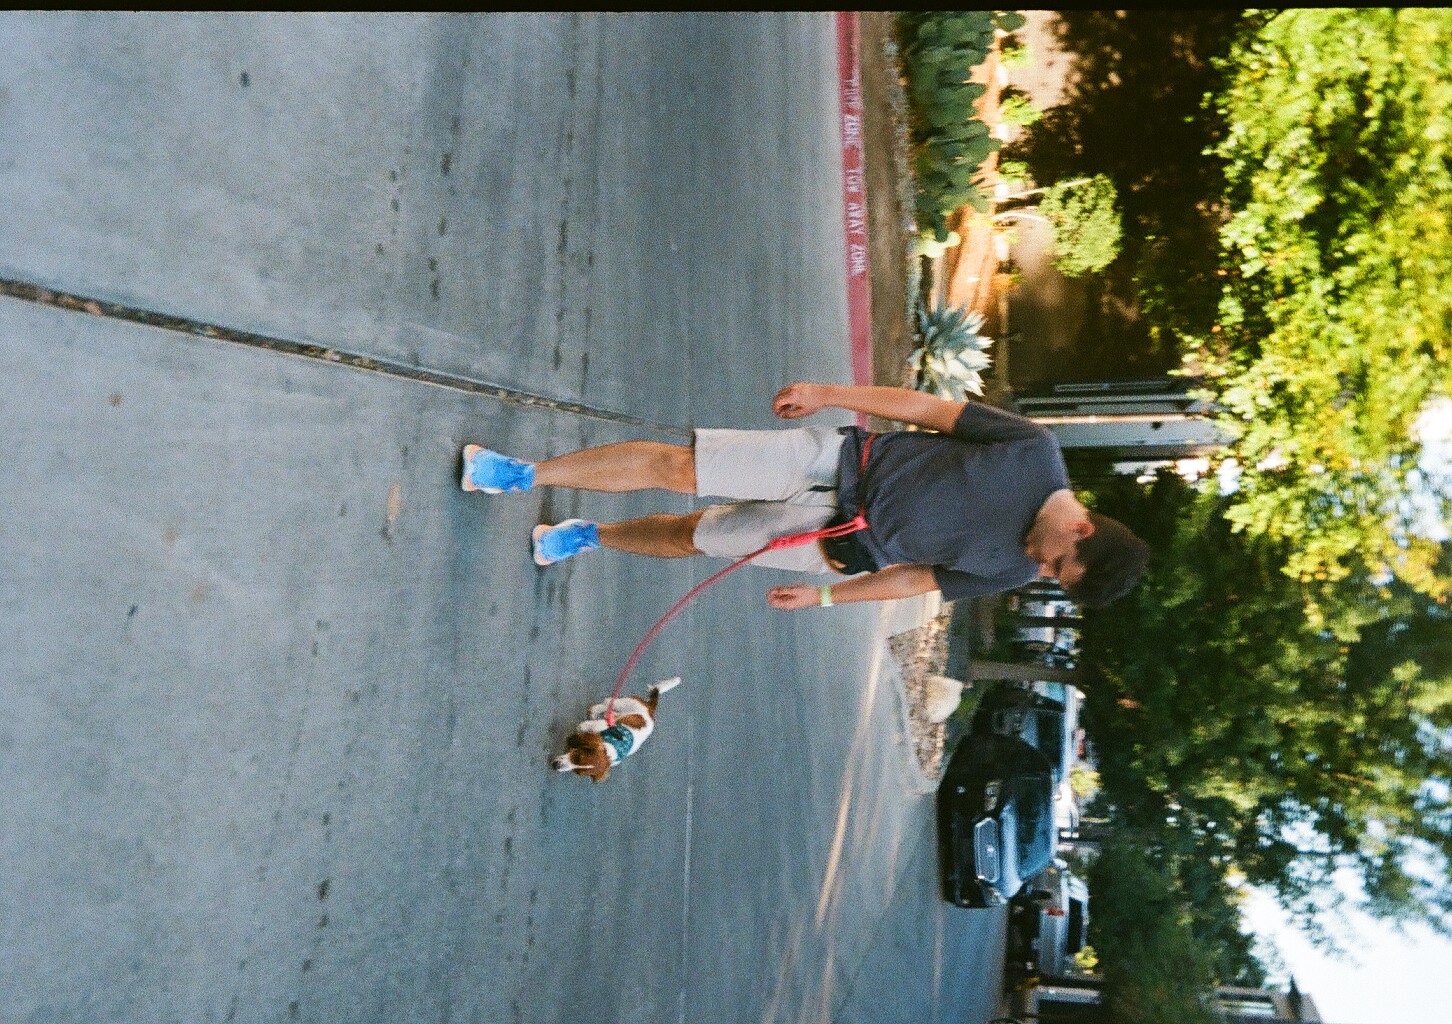 Me walking with our dog, crossing a street